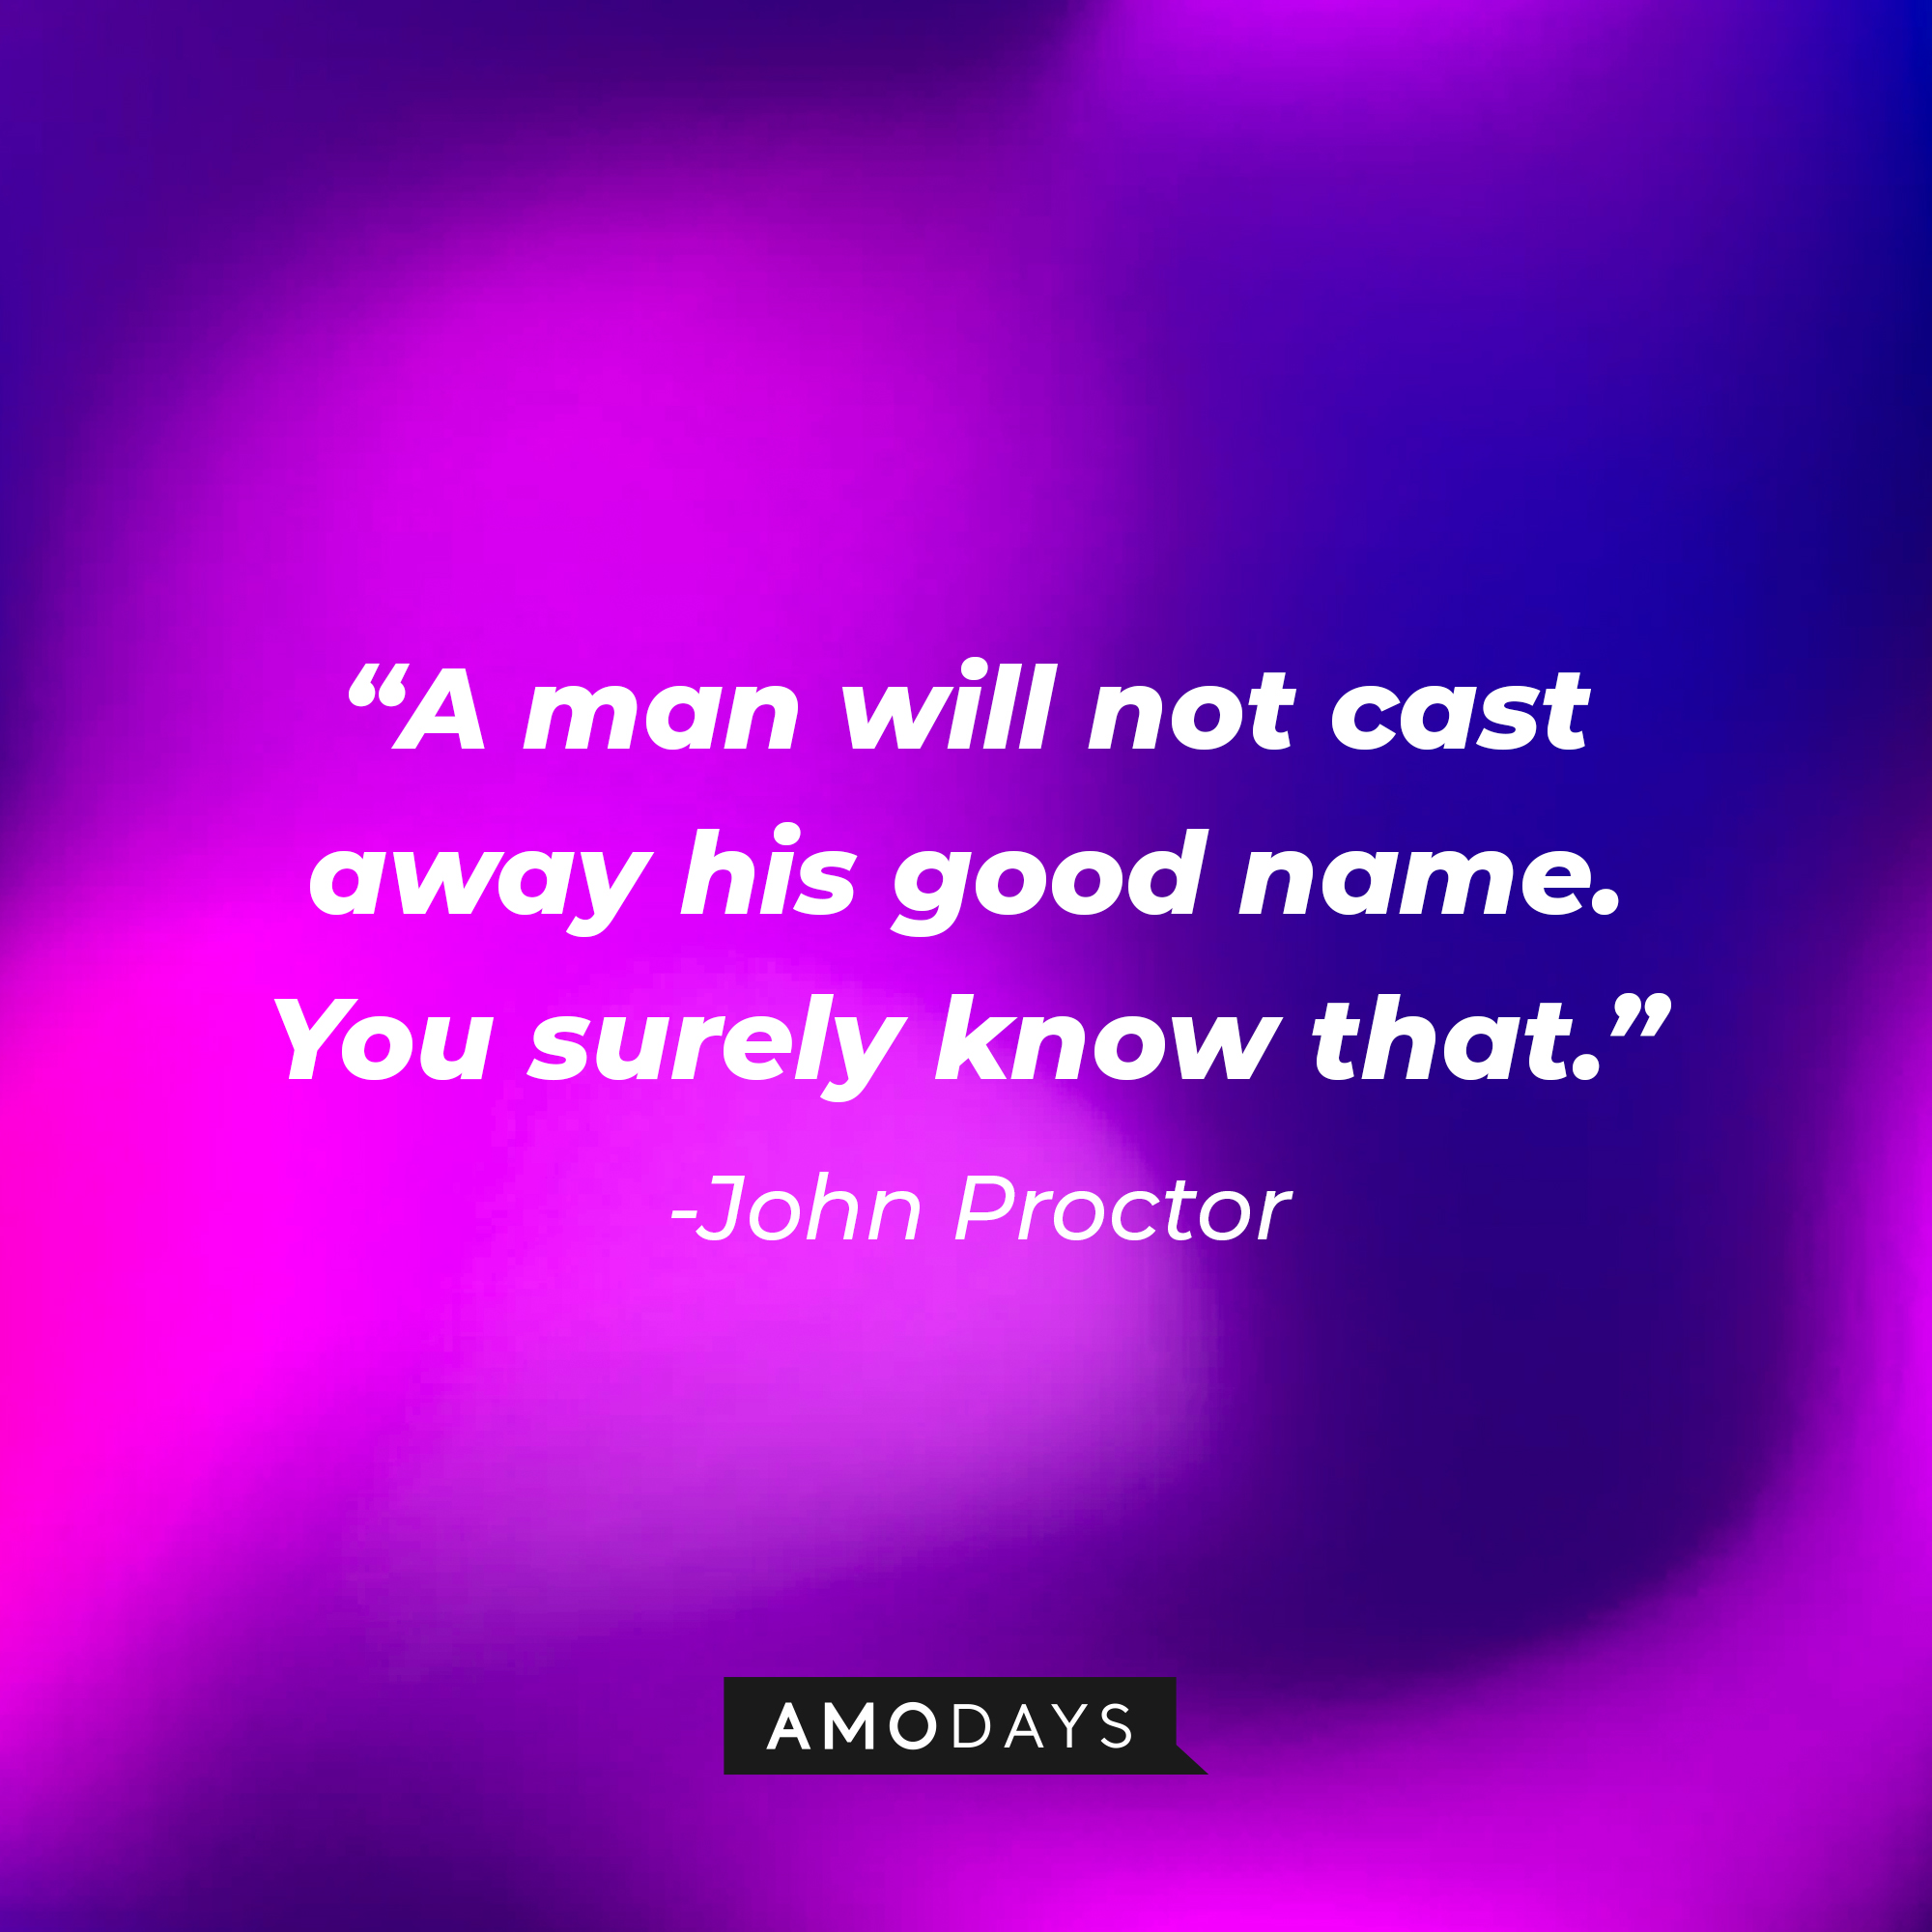 John Proctor's quote: "A man will not cast away his good name. You surely know that." | Image: AmoDays